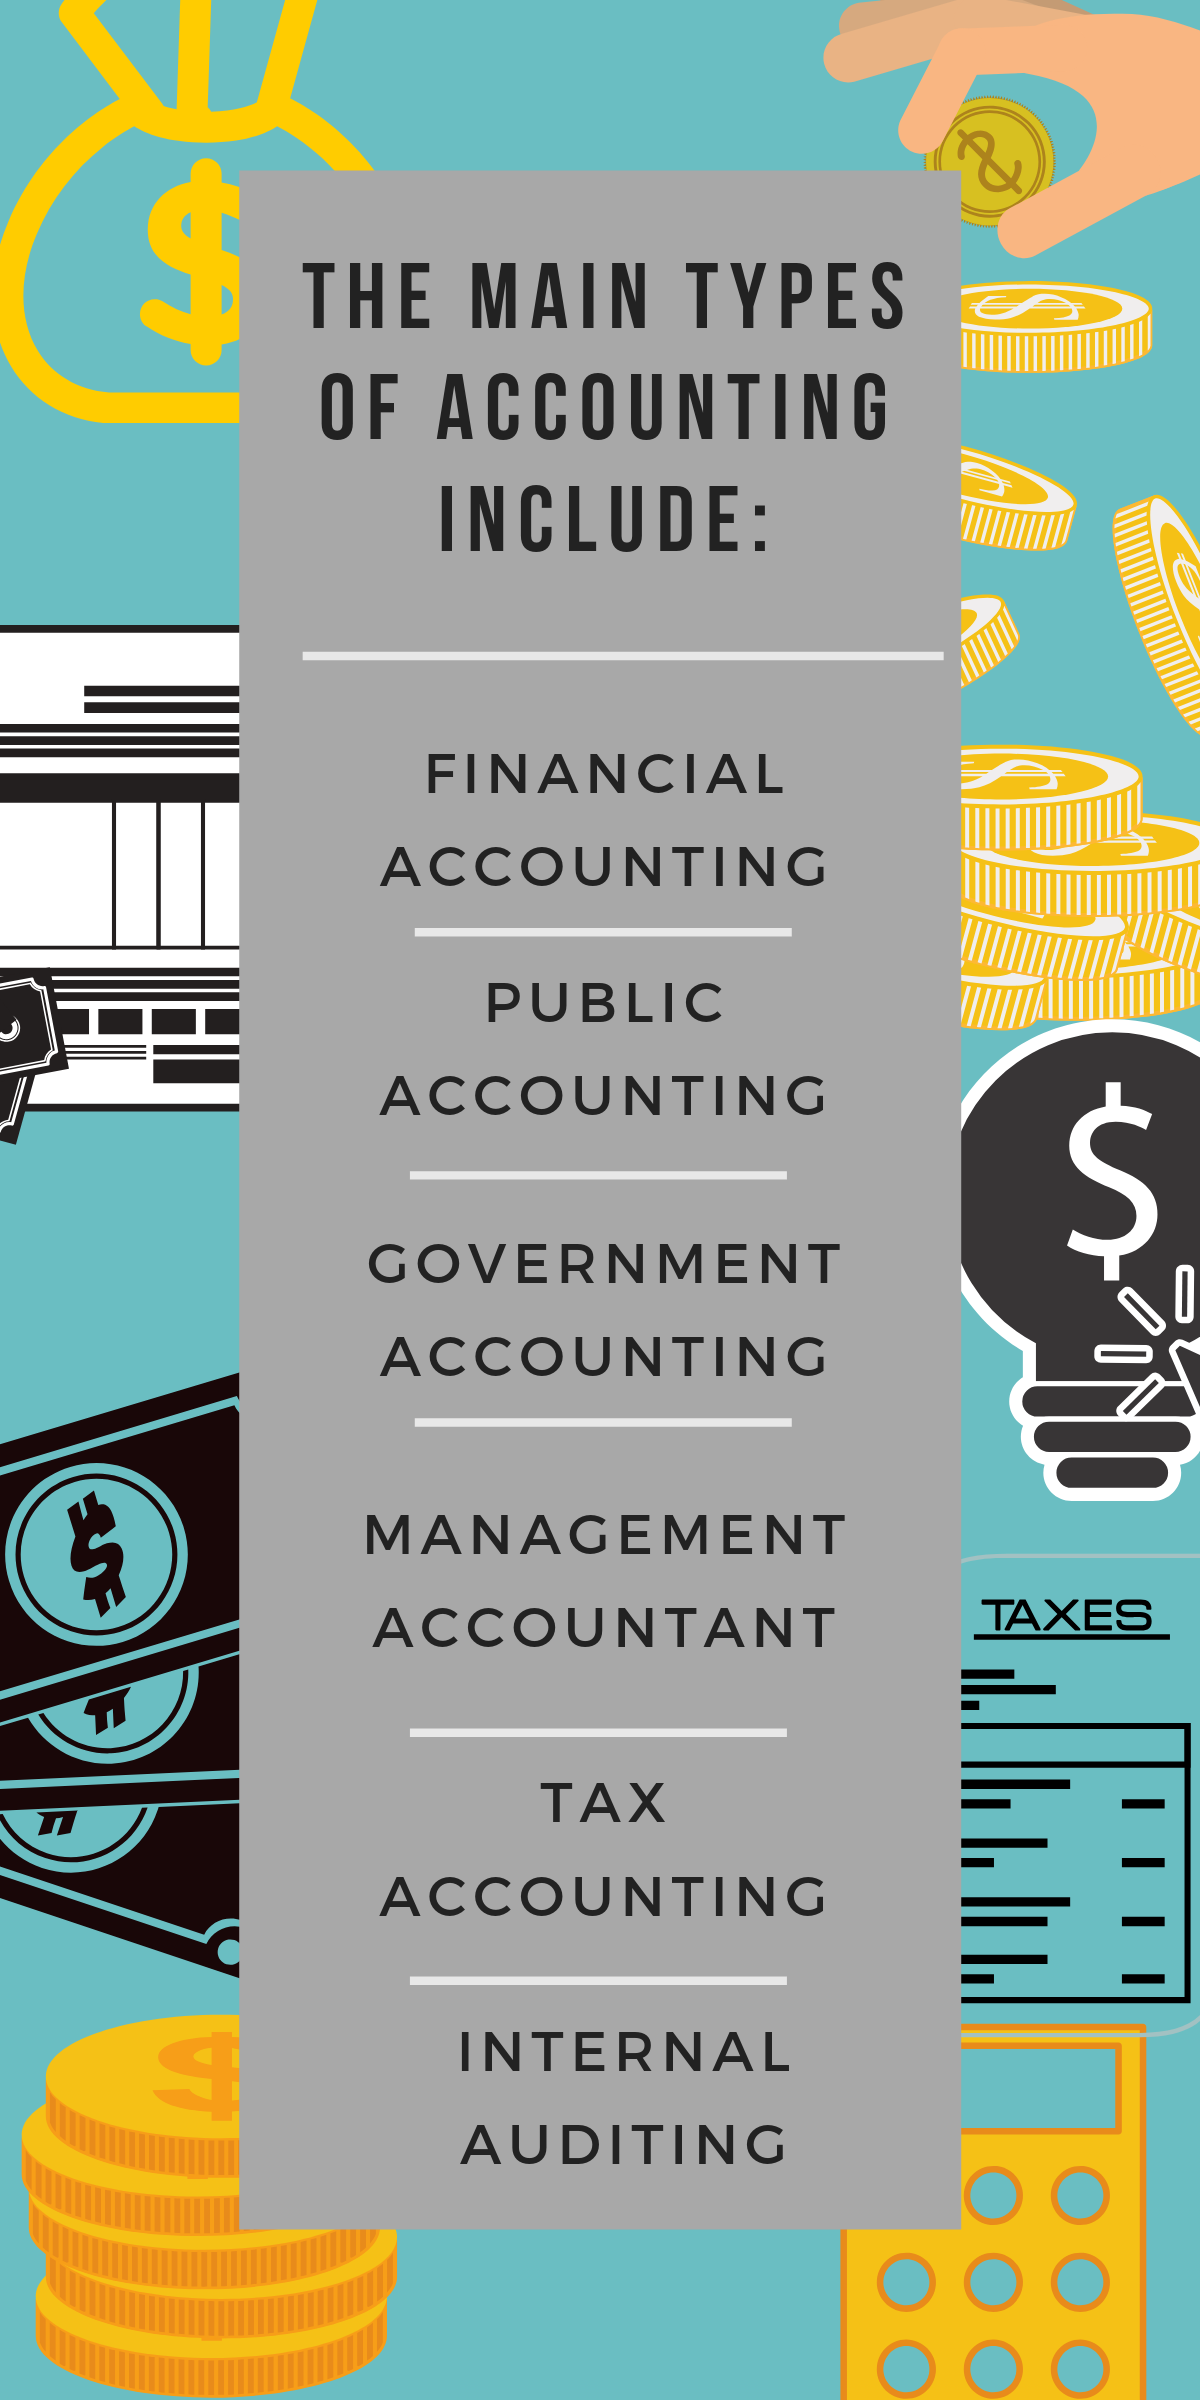 The main types of accounting include: Financial Accounting, Public Accounting, Government Accounting, Management Accounting, Tax Accounting, Internal Auditing